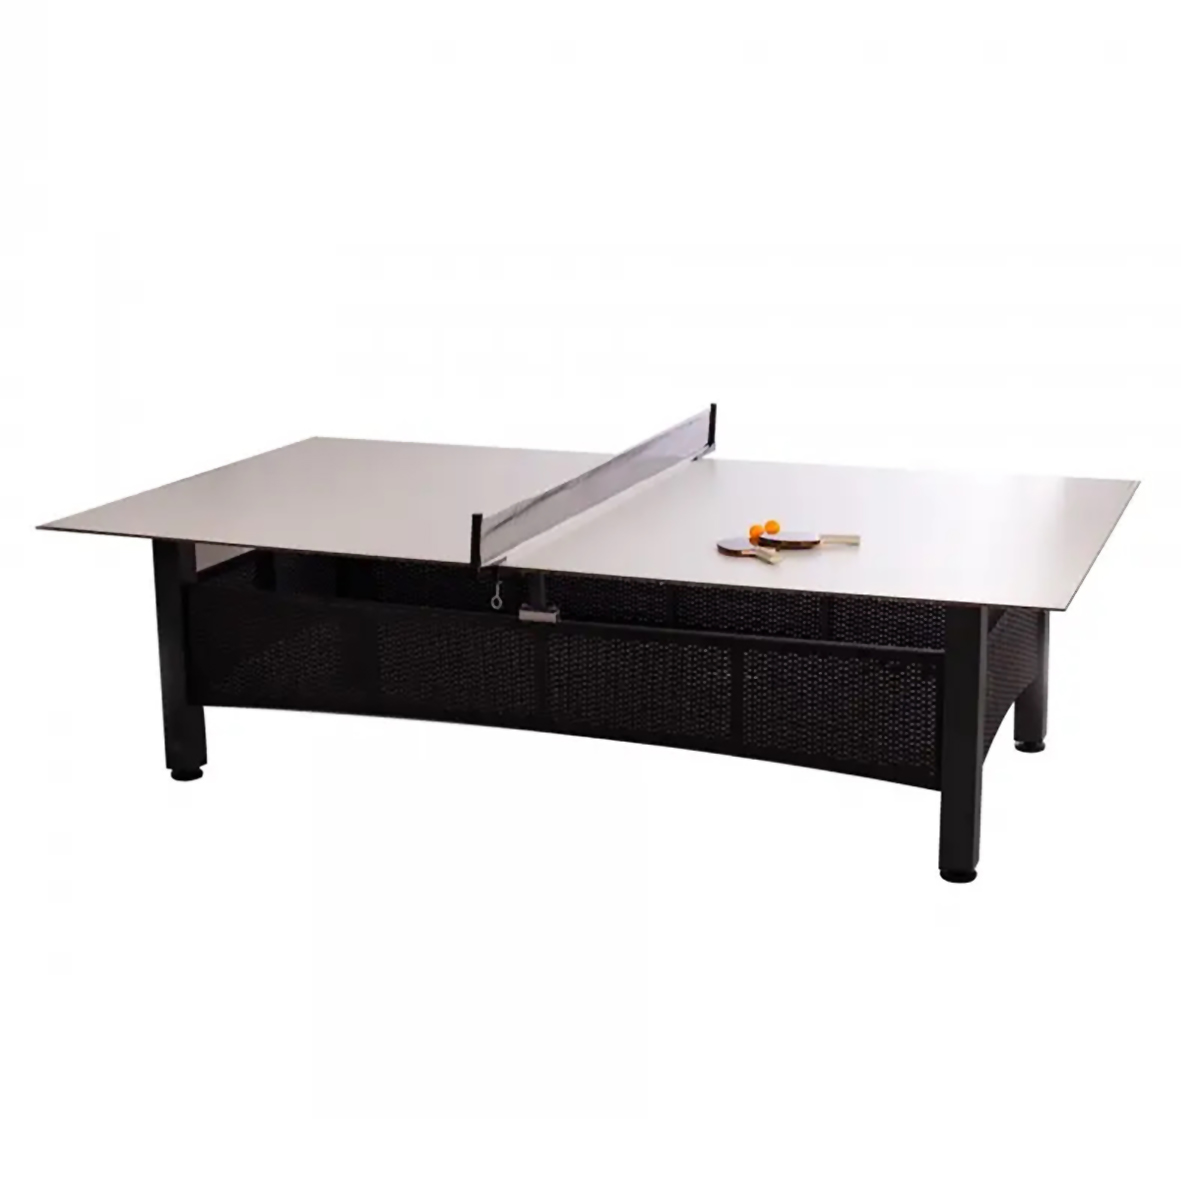 FENOMEL OUTDOOR TABLE TENNIS TABLE.